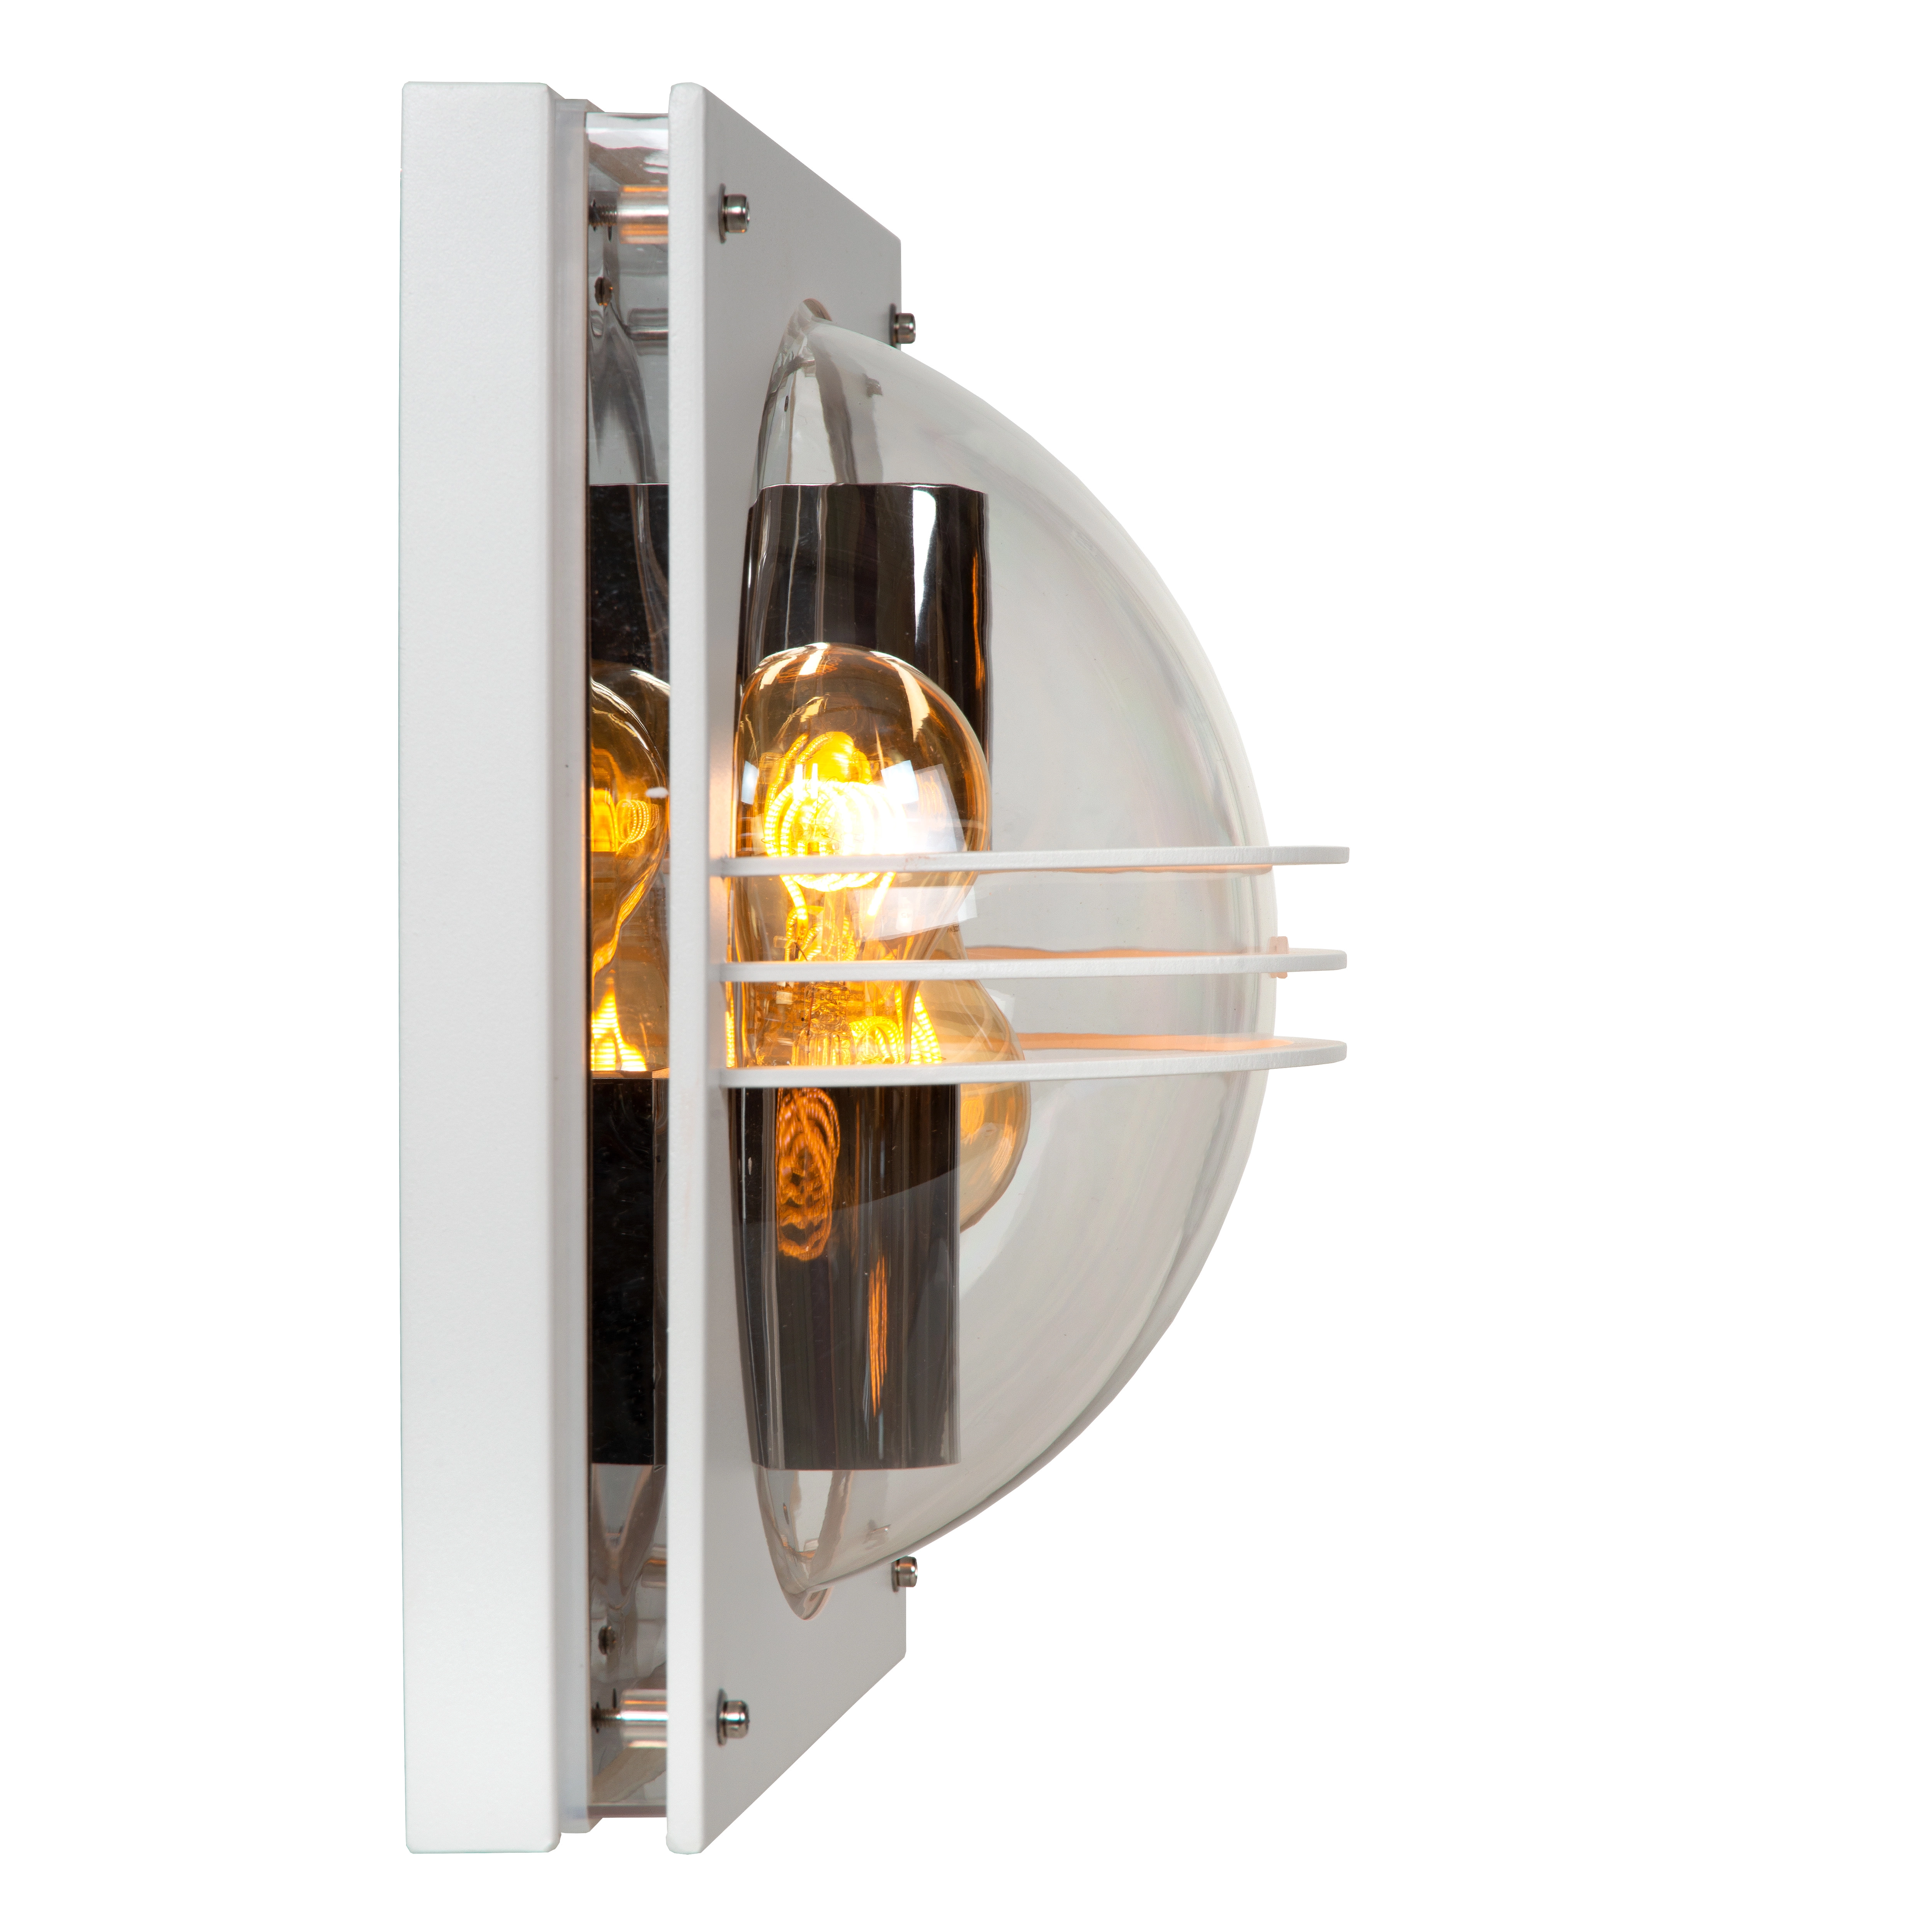 LU 14828/02/31 Lucide PRIVAS - Wall light Outdoor - 2xE27 - IP44 - White